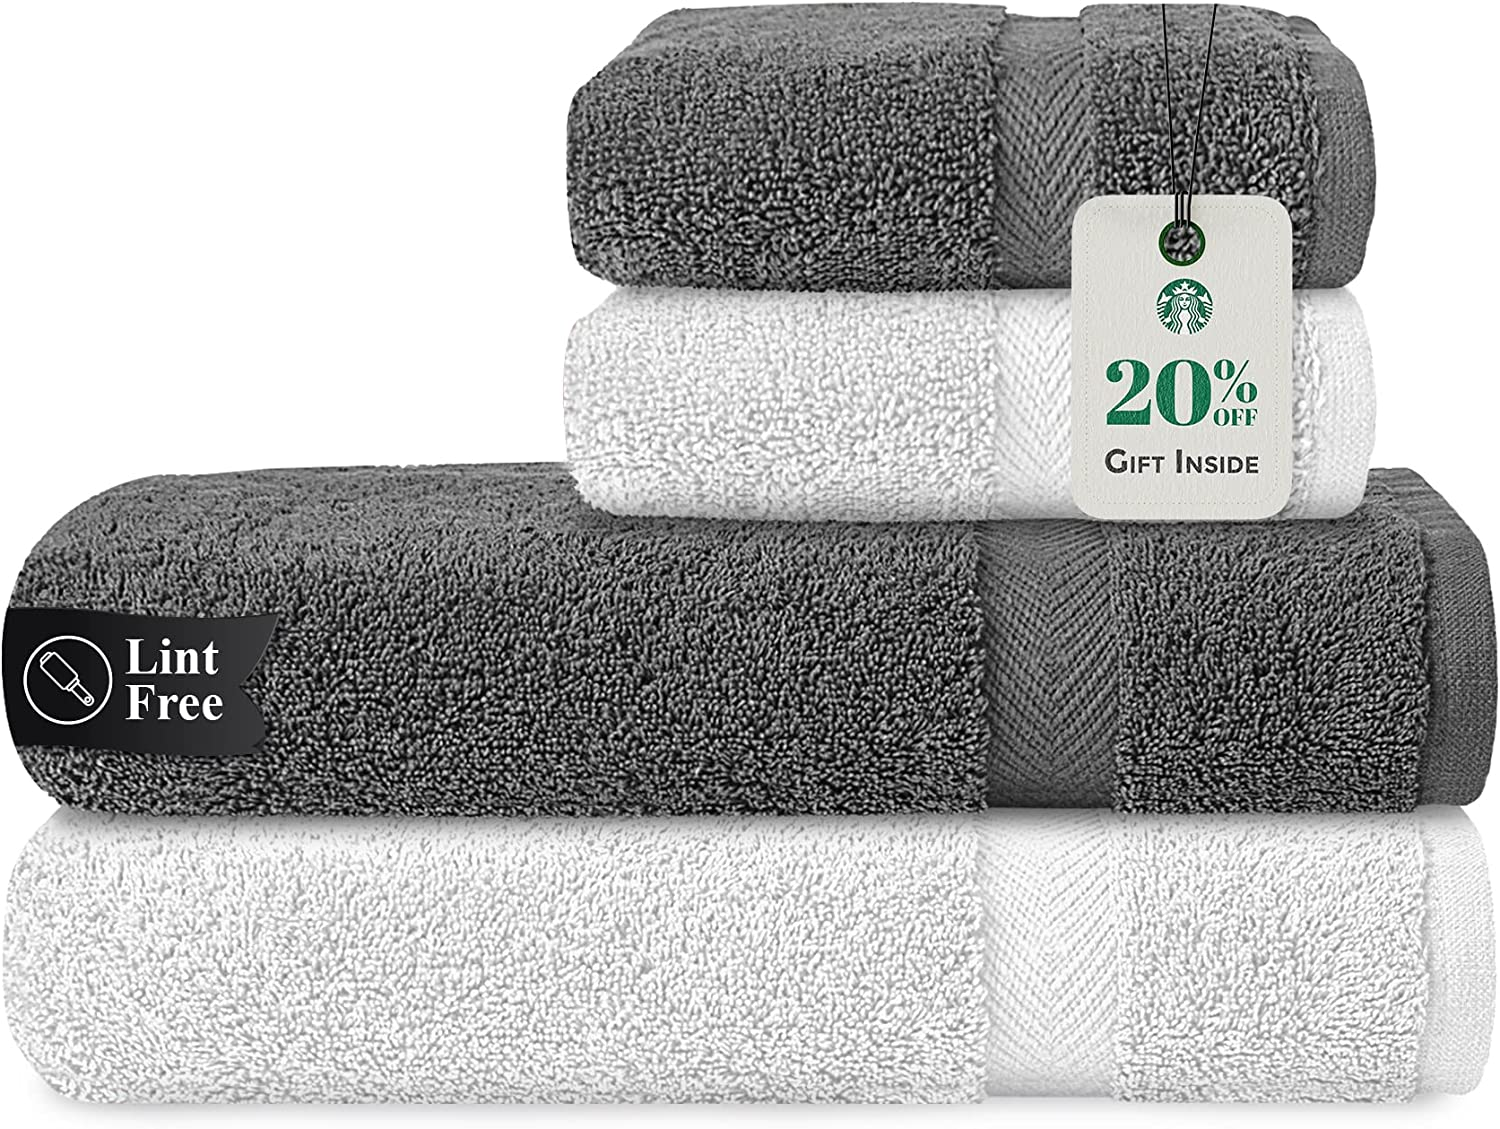 Stony Edge Towel Set, 2 Bath Towels & 2 Hand Towels, 100% Cotton, 600 GSM, Soft & Absorbent for Bathroom, Kitchen, Gym & Spa, White & Maroon